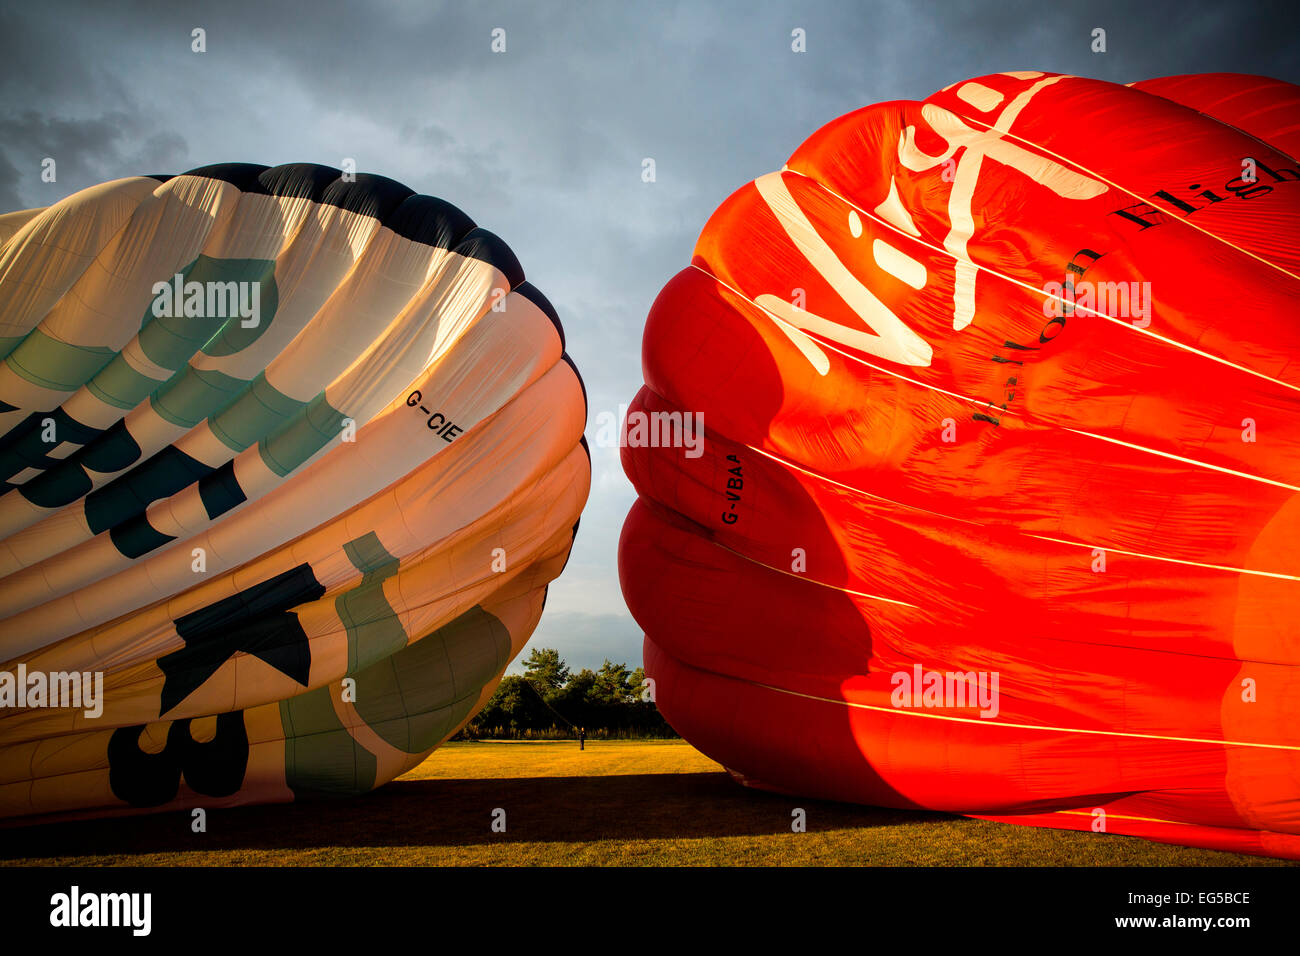 Detail of billowing hot air balloons on field, South Oxfordshire, England Stock Photo